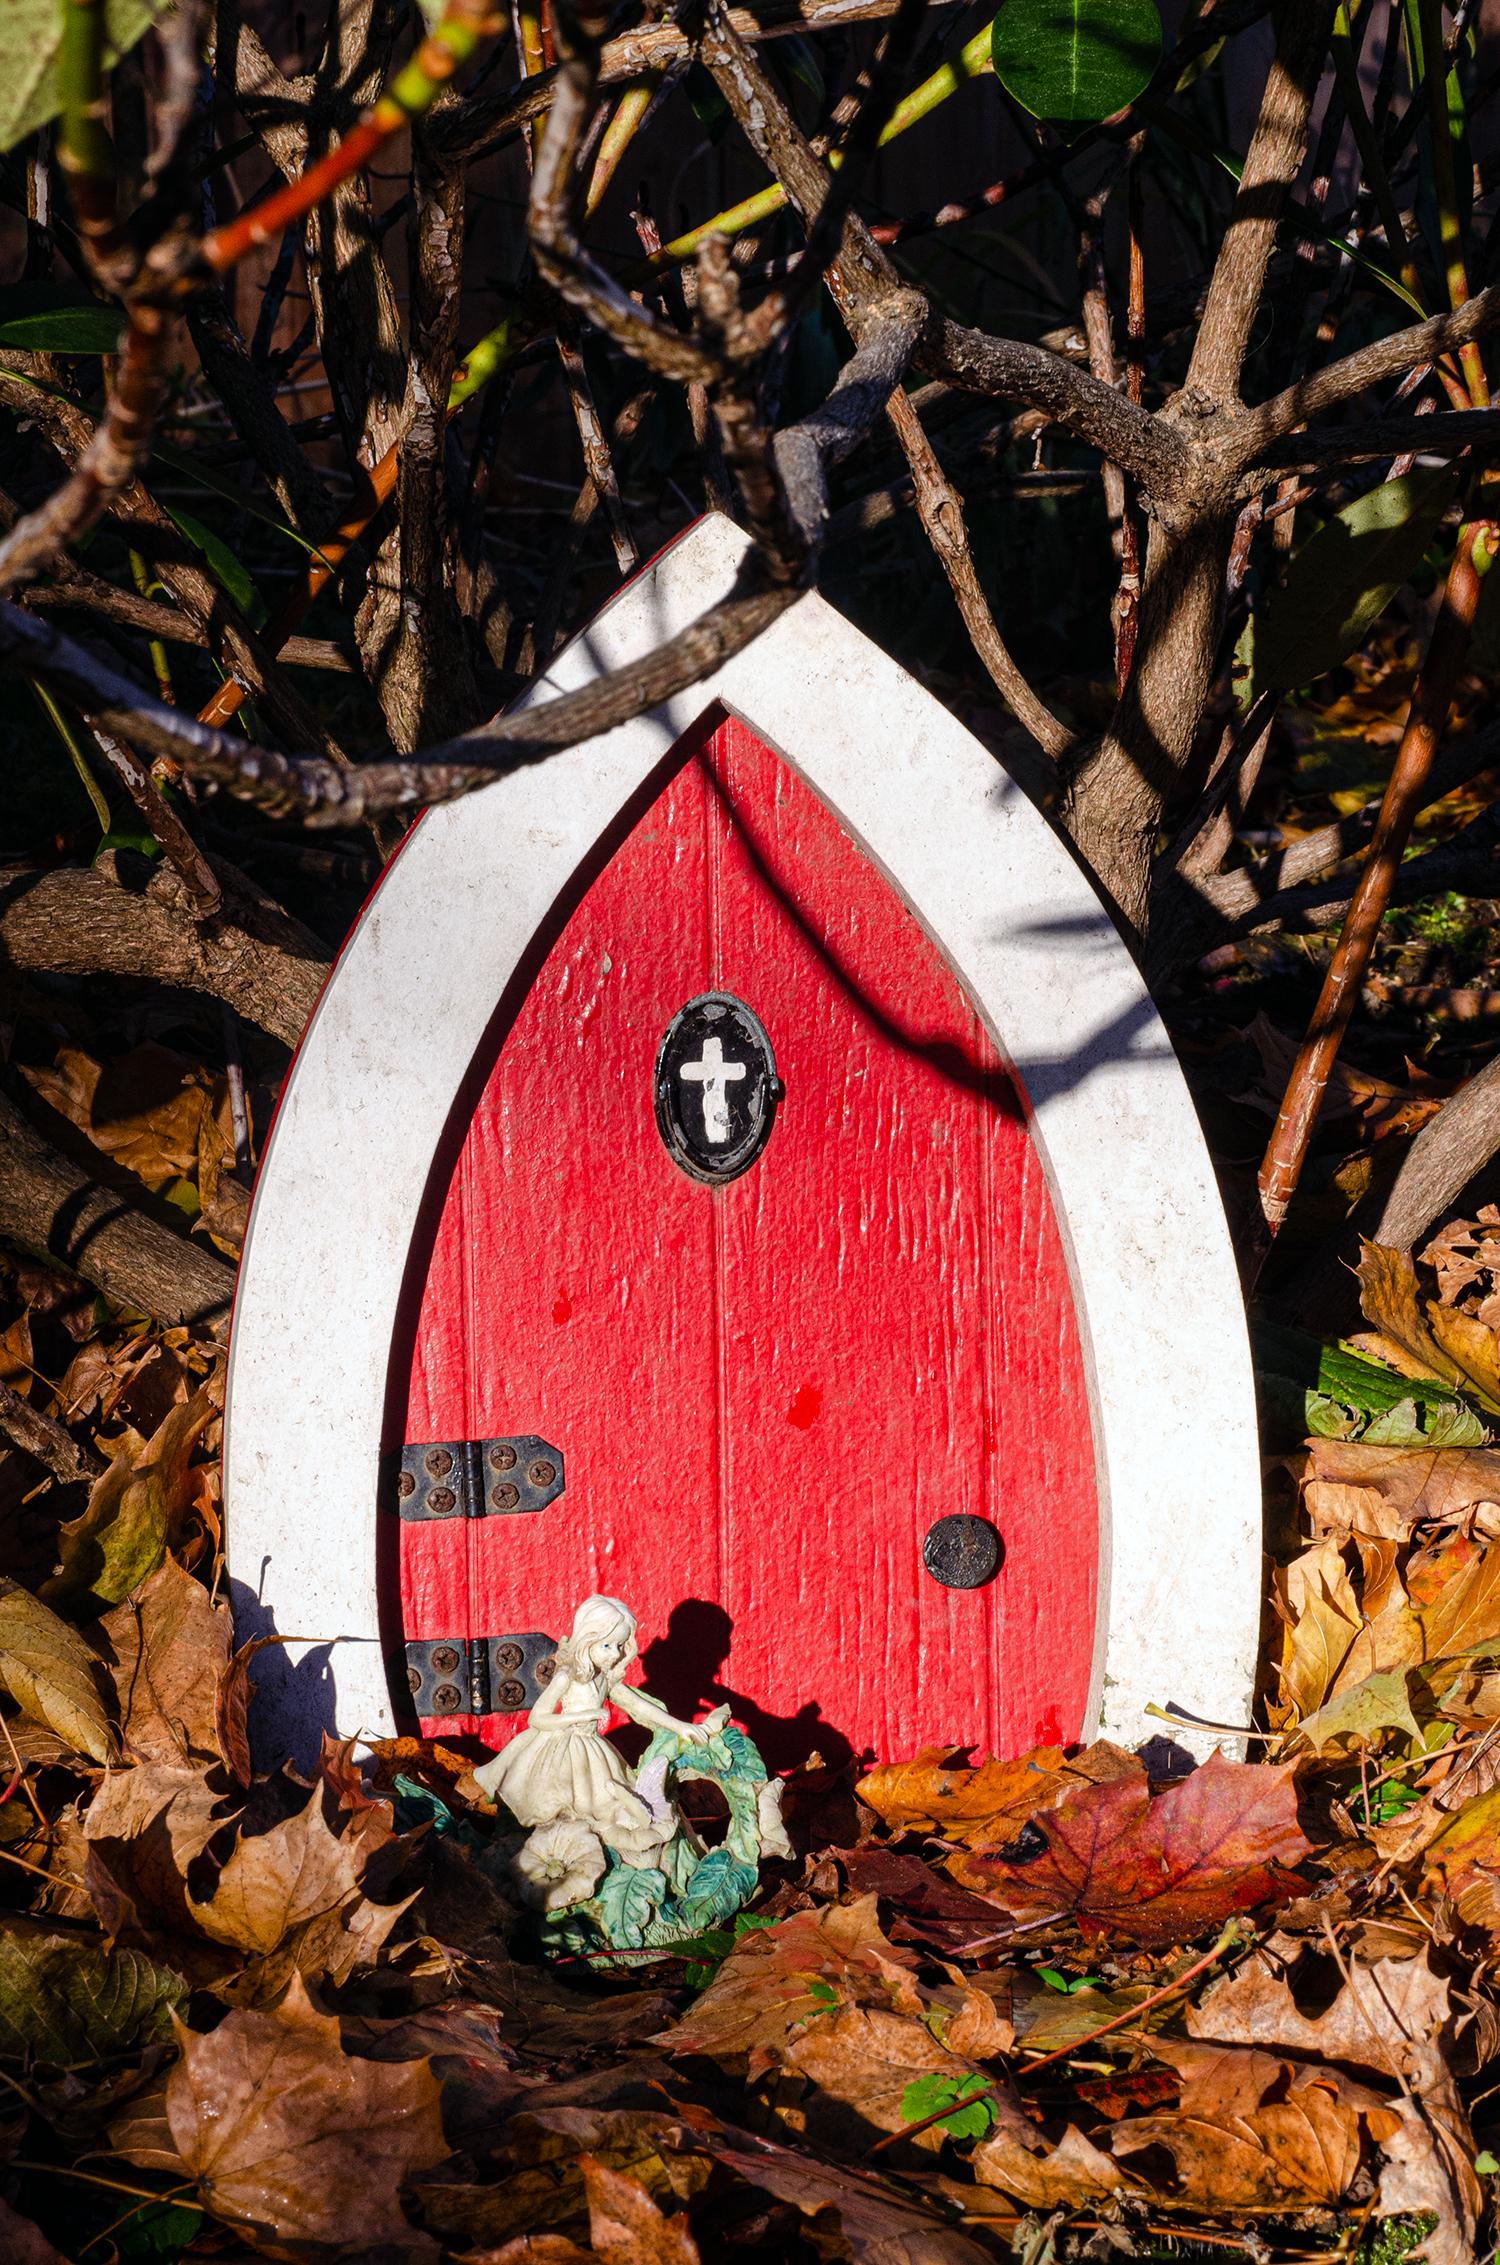 An oval-shaped, wooden, red door with thick white trim sits on a carpet of leaves beneath bare branches of shrubbery. Black metal hinges, a black doorknob, and a flat black oval door knocker with a white painted cross adorn the door. A small figurine is situated in front.